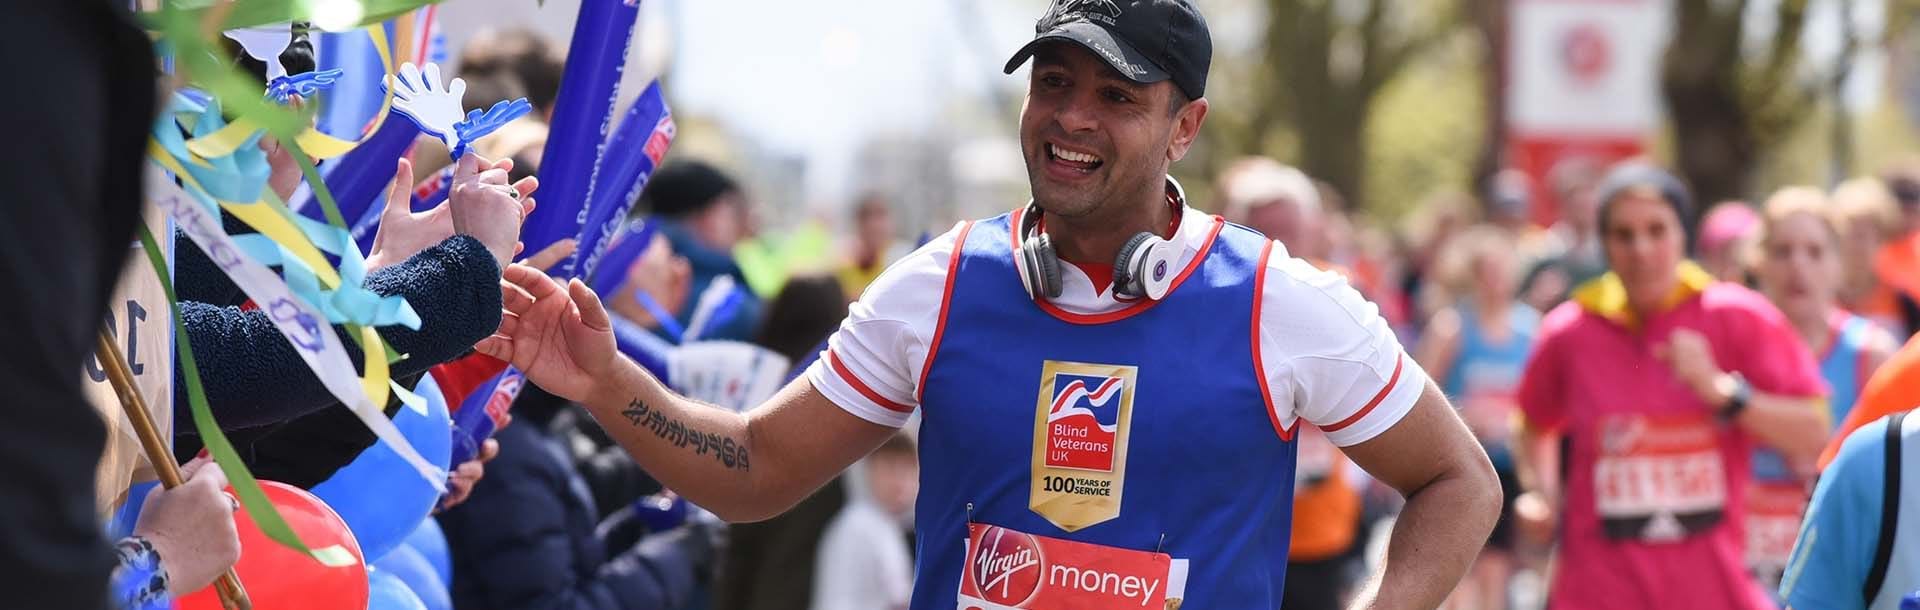 Charity supporter Dominic smiling as he runs along a crowd, wearing a Blind Veterans UK vest and holding his hand out to wave as he passes